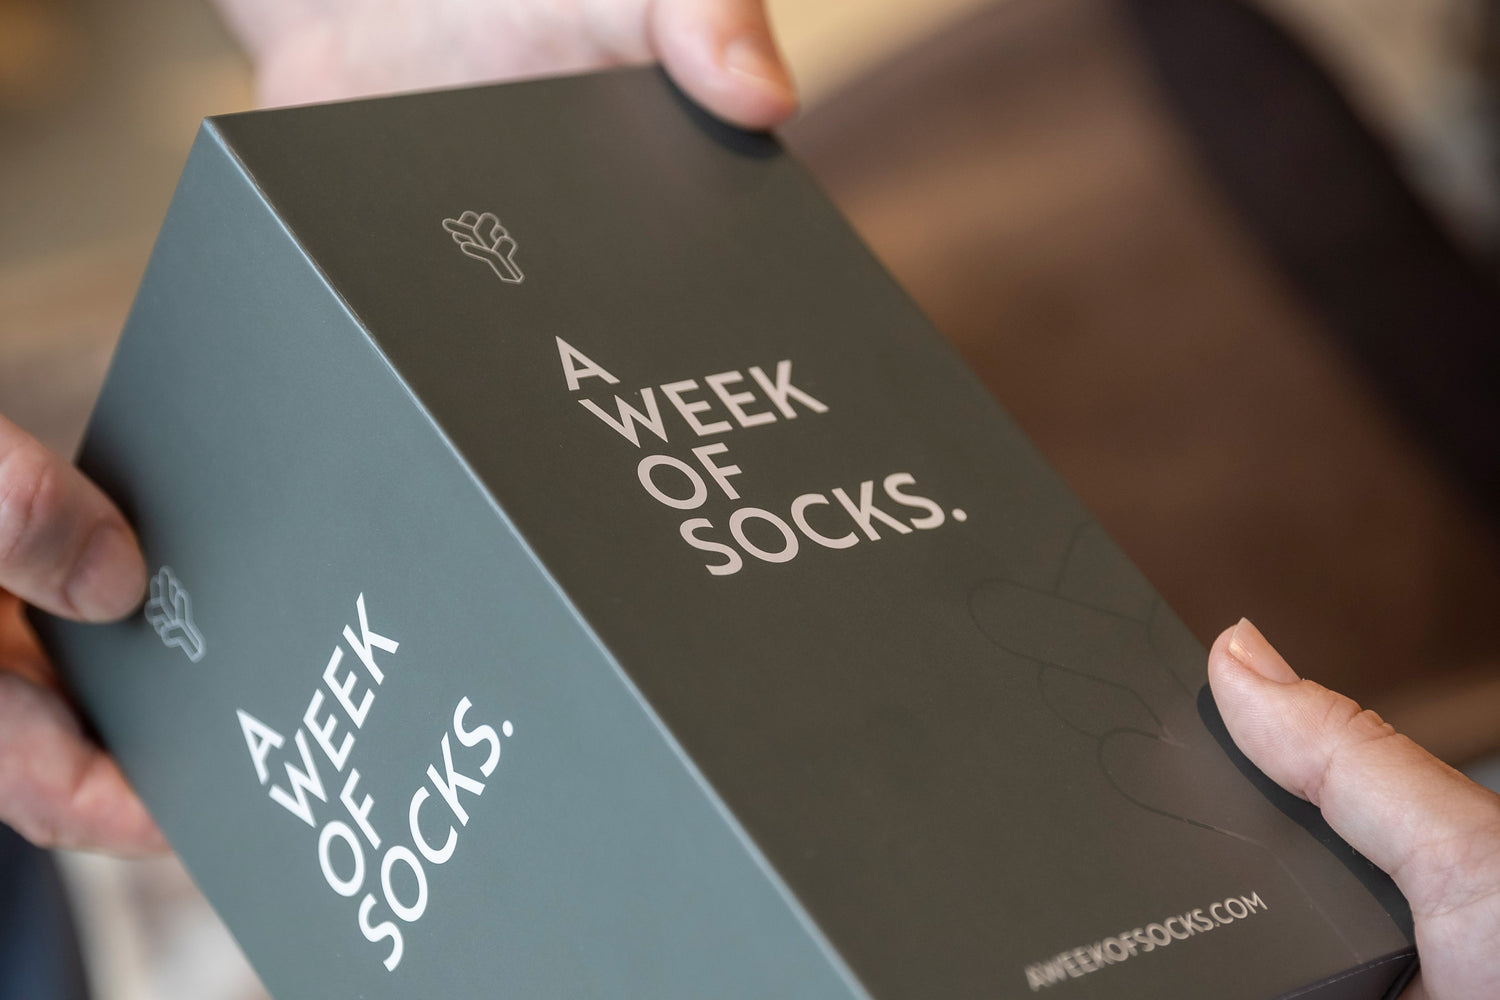 A_Week_Of_Socks_Banner_Email_Hands